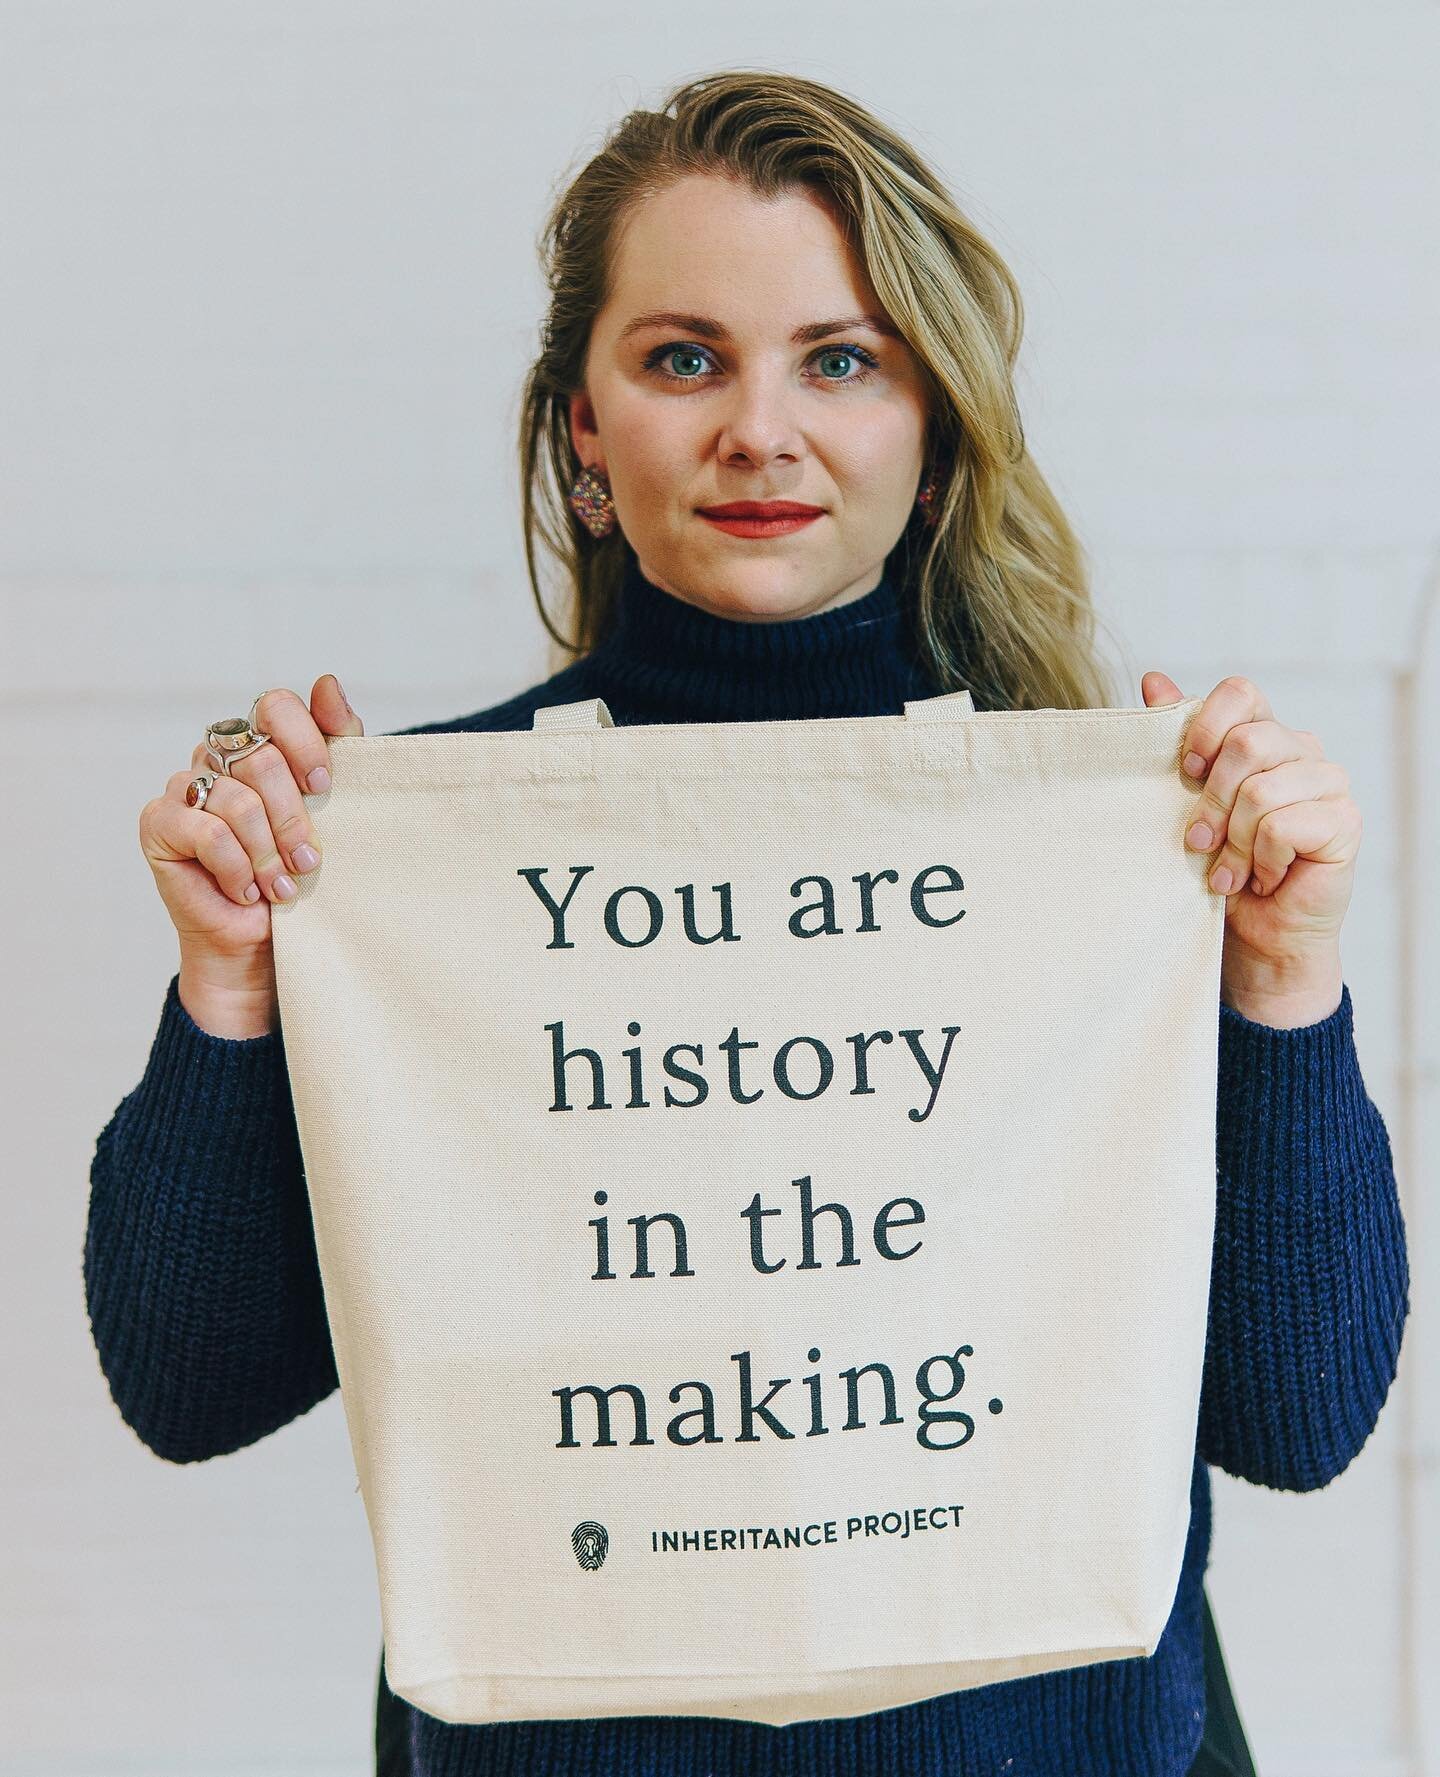 &ldquo;You are history in the making.⁠&rdquo;
⁠
This phrase first came to me when I started imagining what @inheritanceproject could be, and how it could help people from every corner of the world.⁠ I heard it, over and over again, in my mind.

It ha